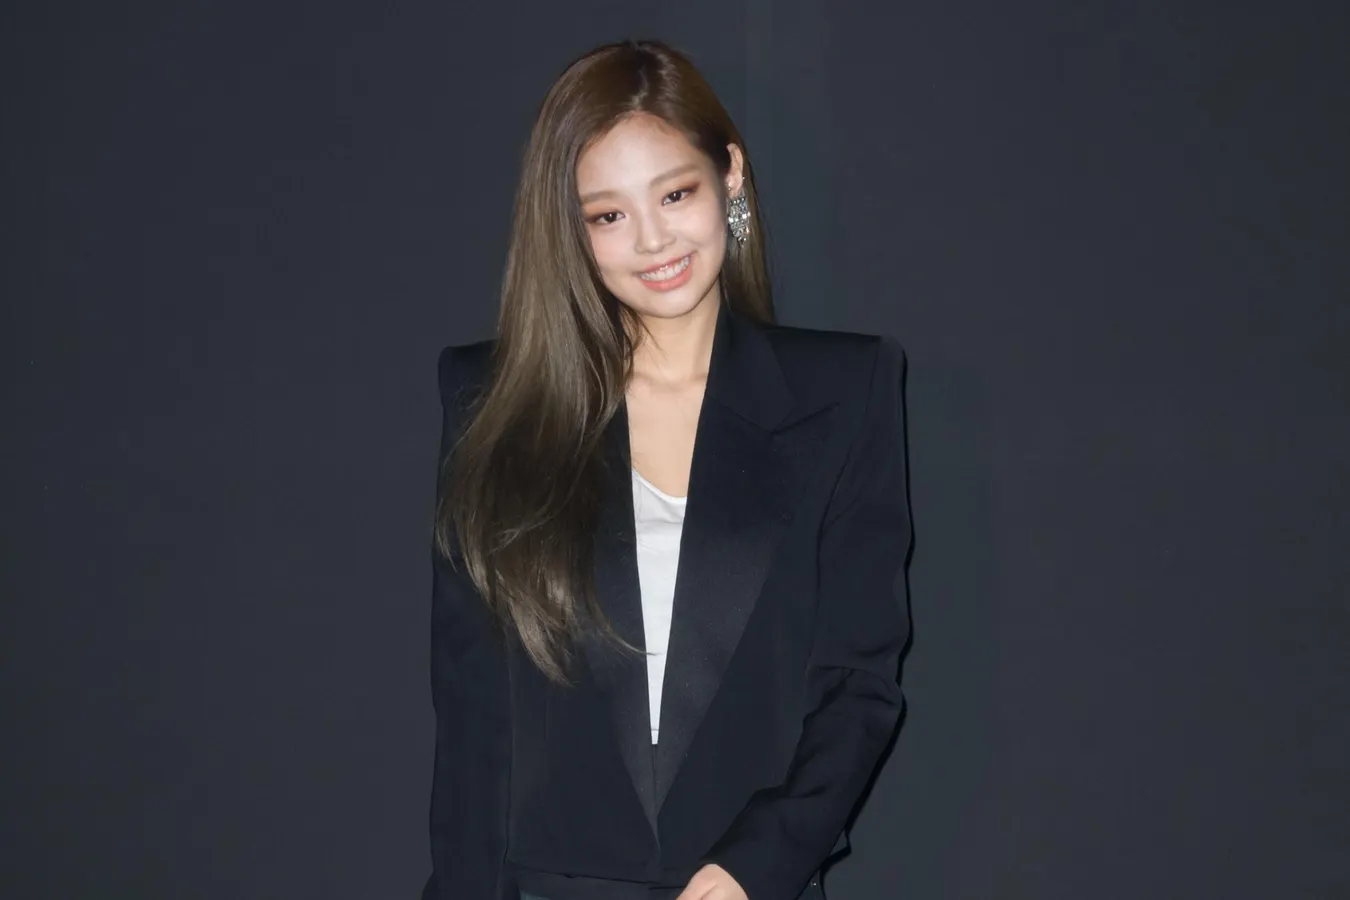 Jennie from Blackpink Breaks Records on Hot R&B/Hip-Hop Songs Chart